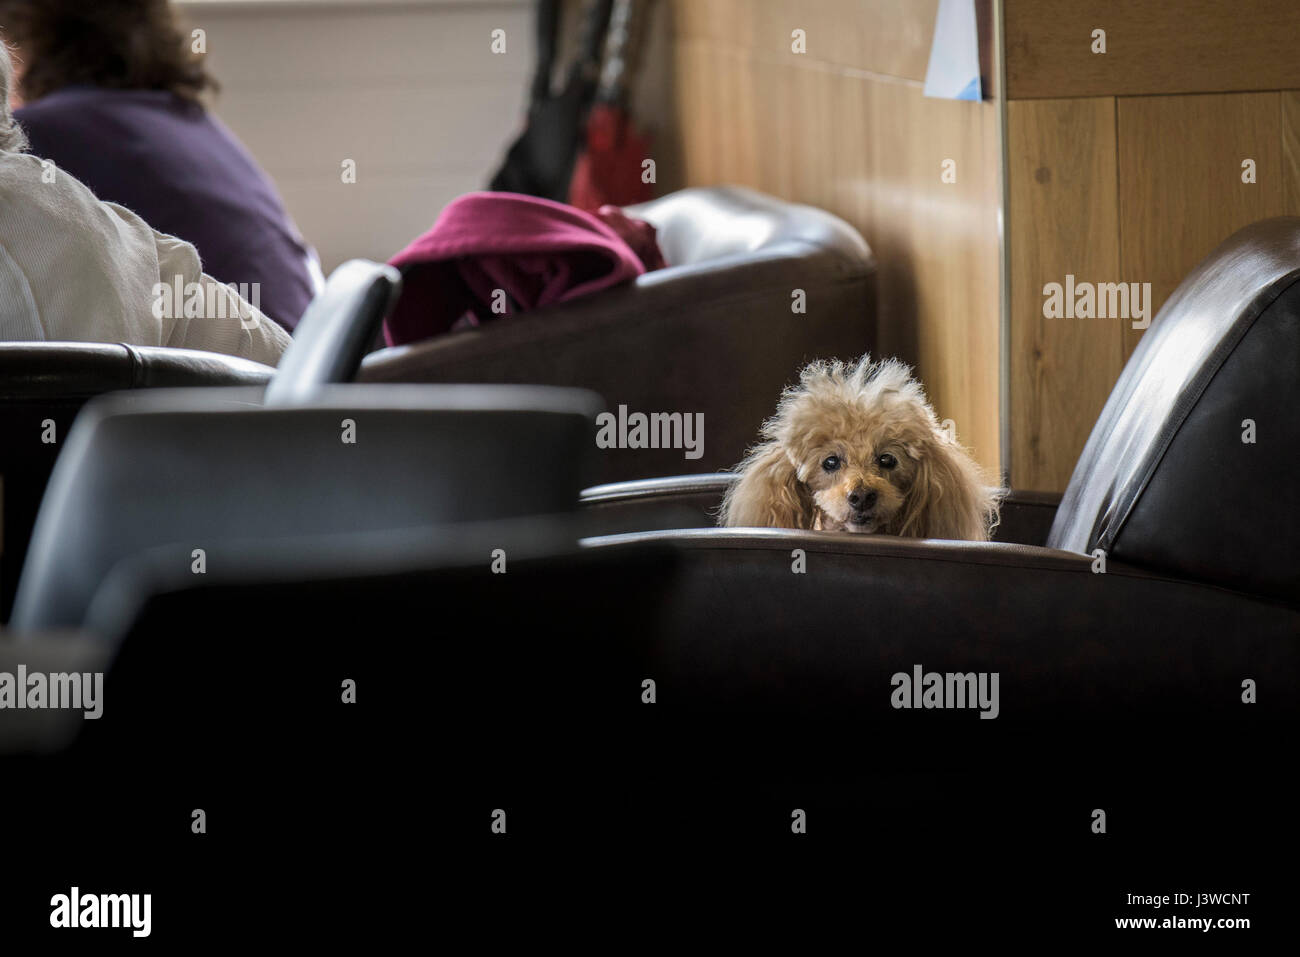 A dog makes direct eye contact;  Sitting on a chair in a cafe; Watching; aware; Watchful; Pet; Cute; Poodle; Animal Stock Photo